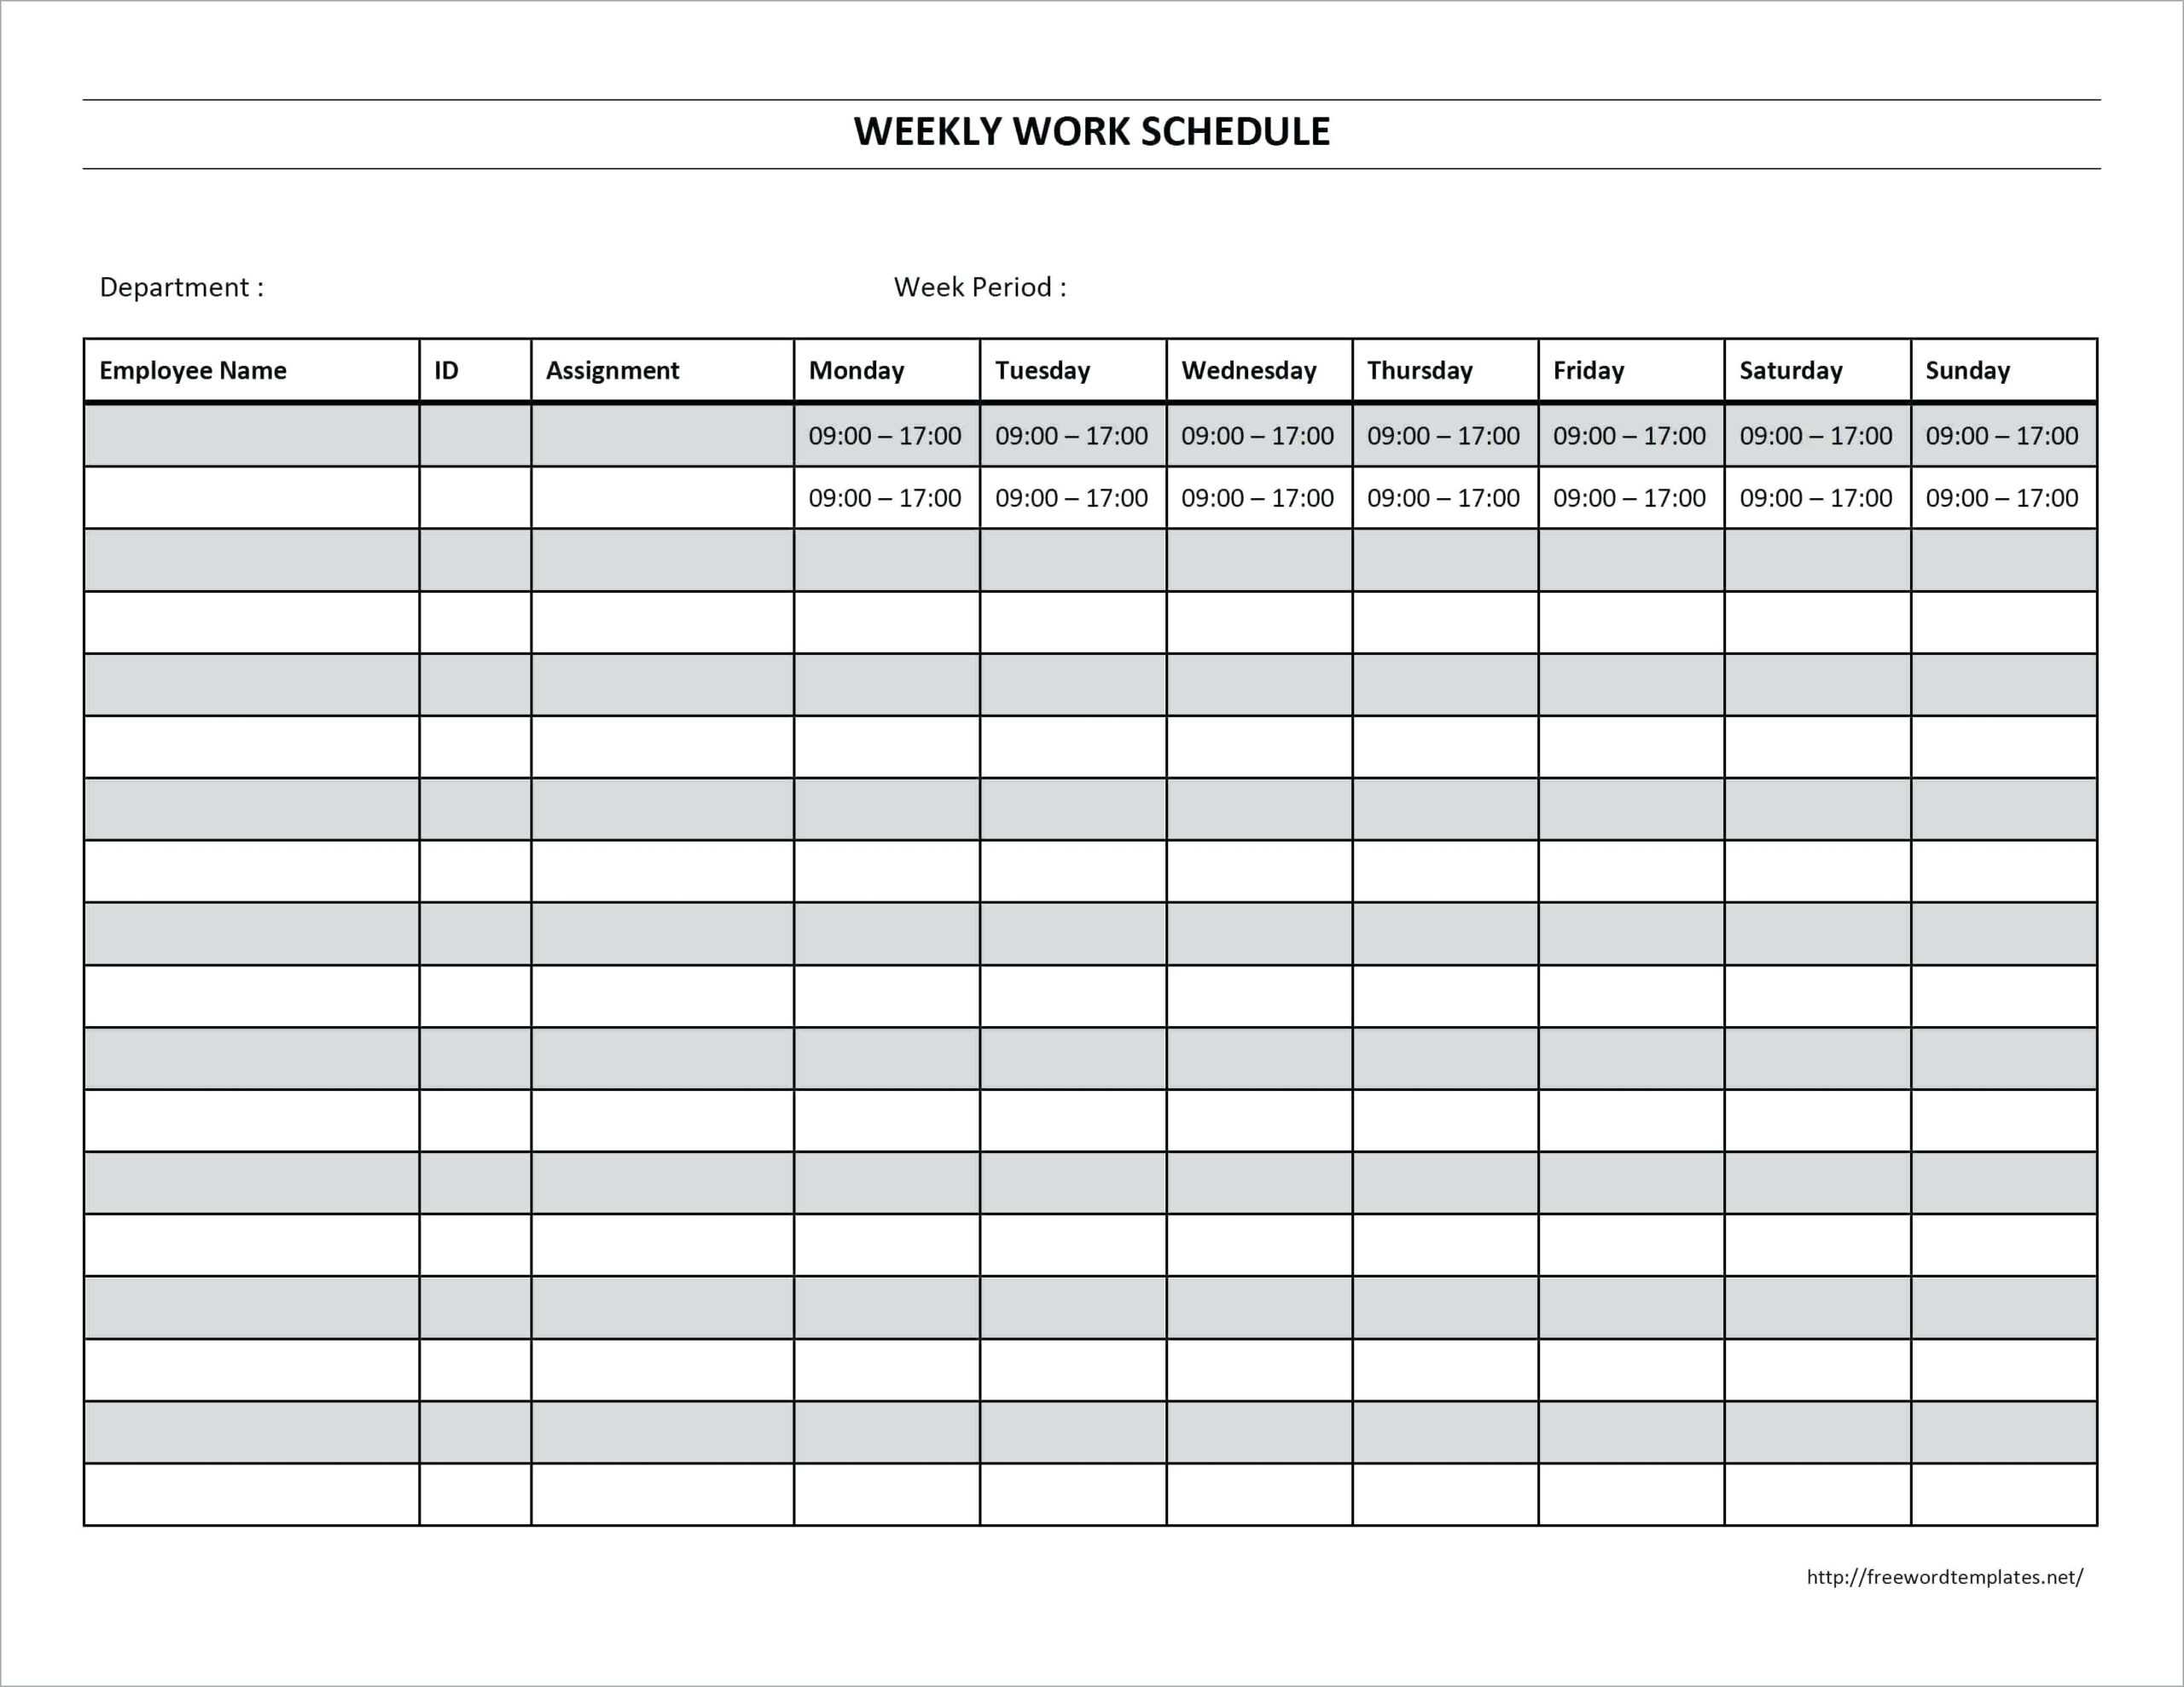 Monthly Work Schedule Template Printable – Wovensheet.co Regarding Blank Monthly Work Schedule Template